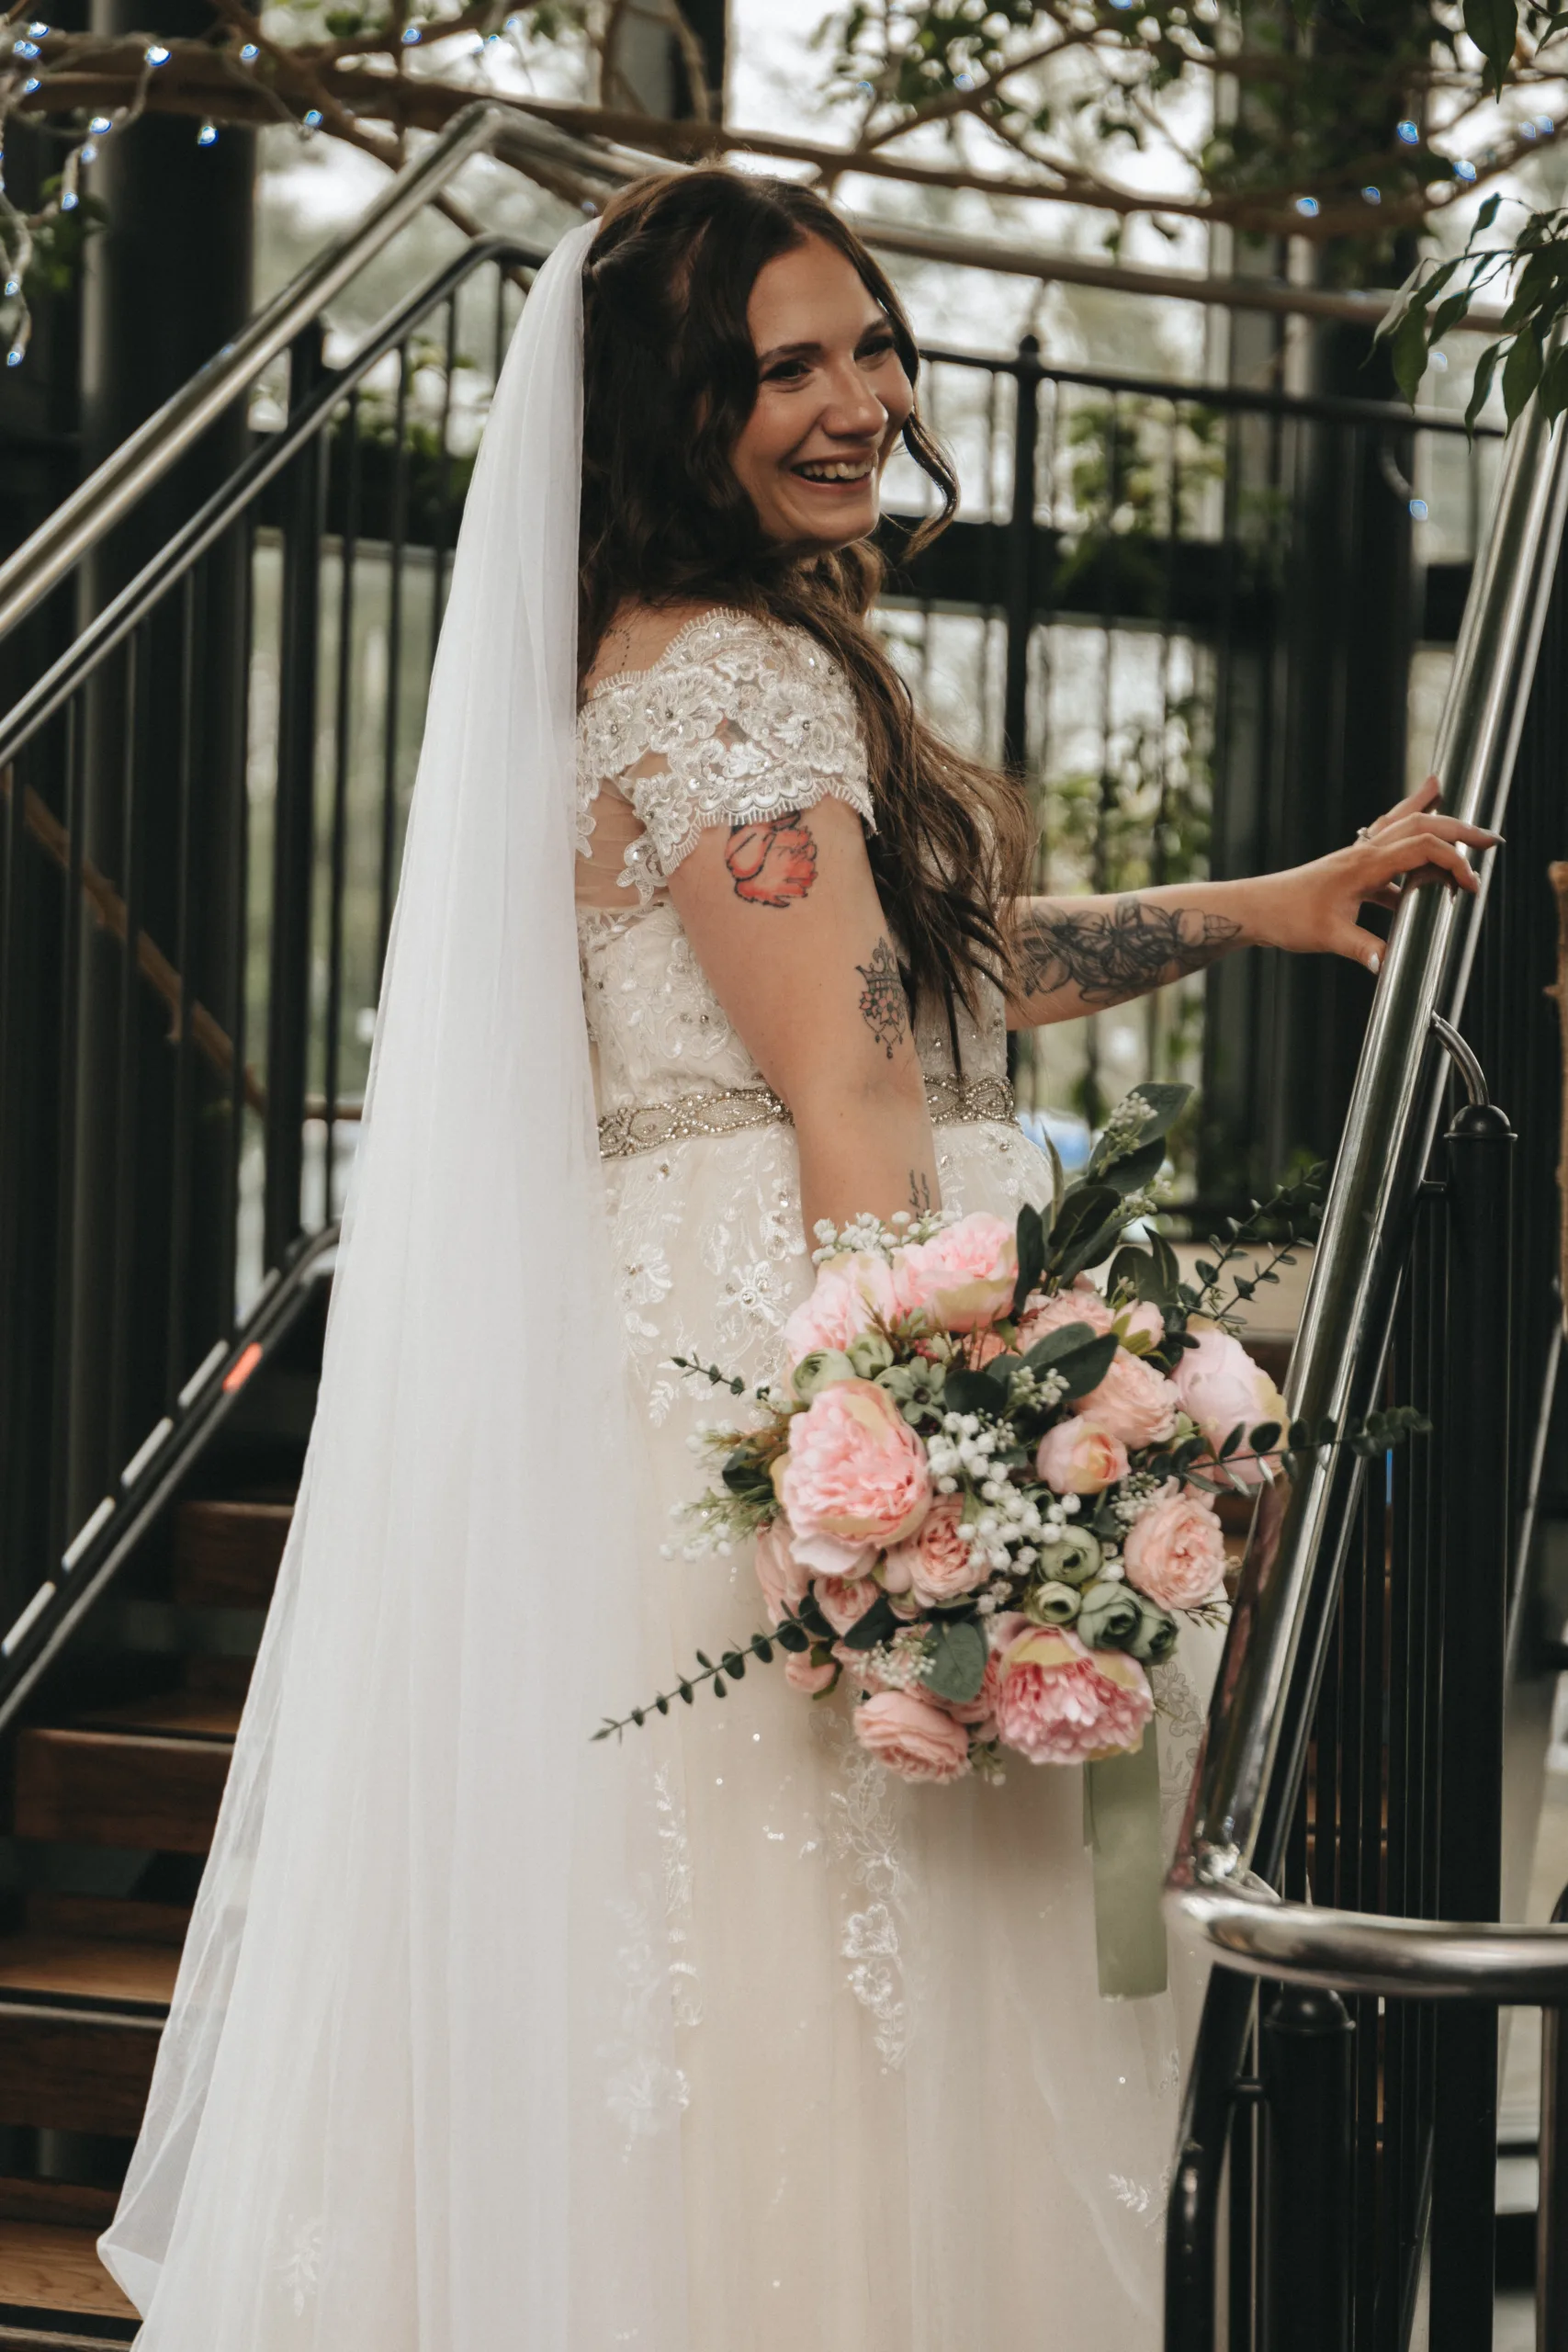 A woman in a wedding dress holding a bouquet of flowers.